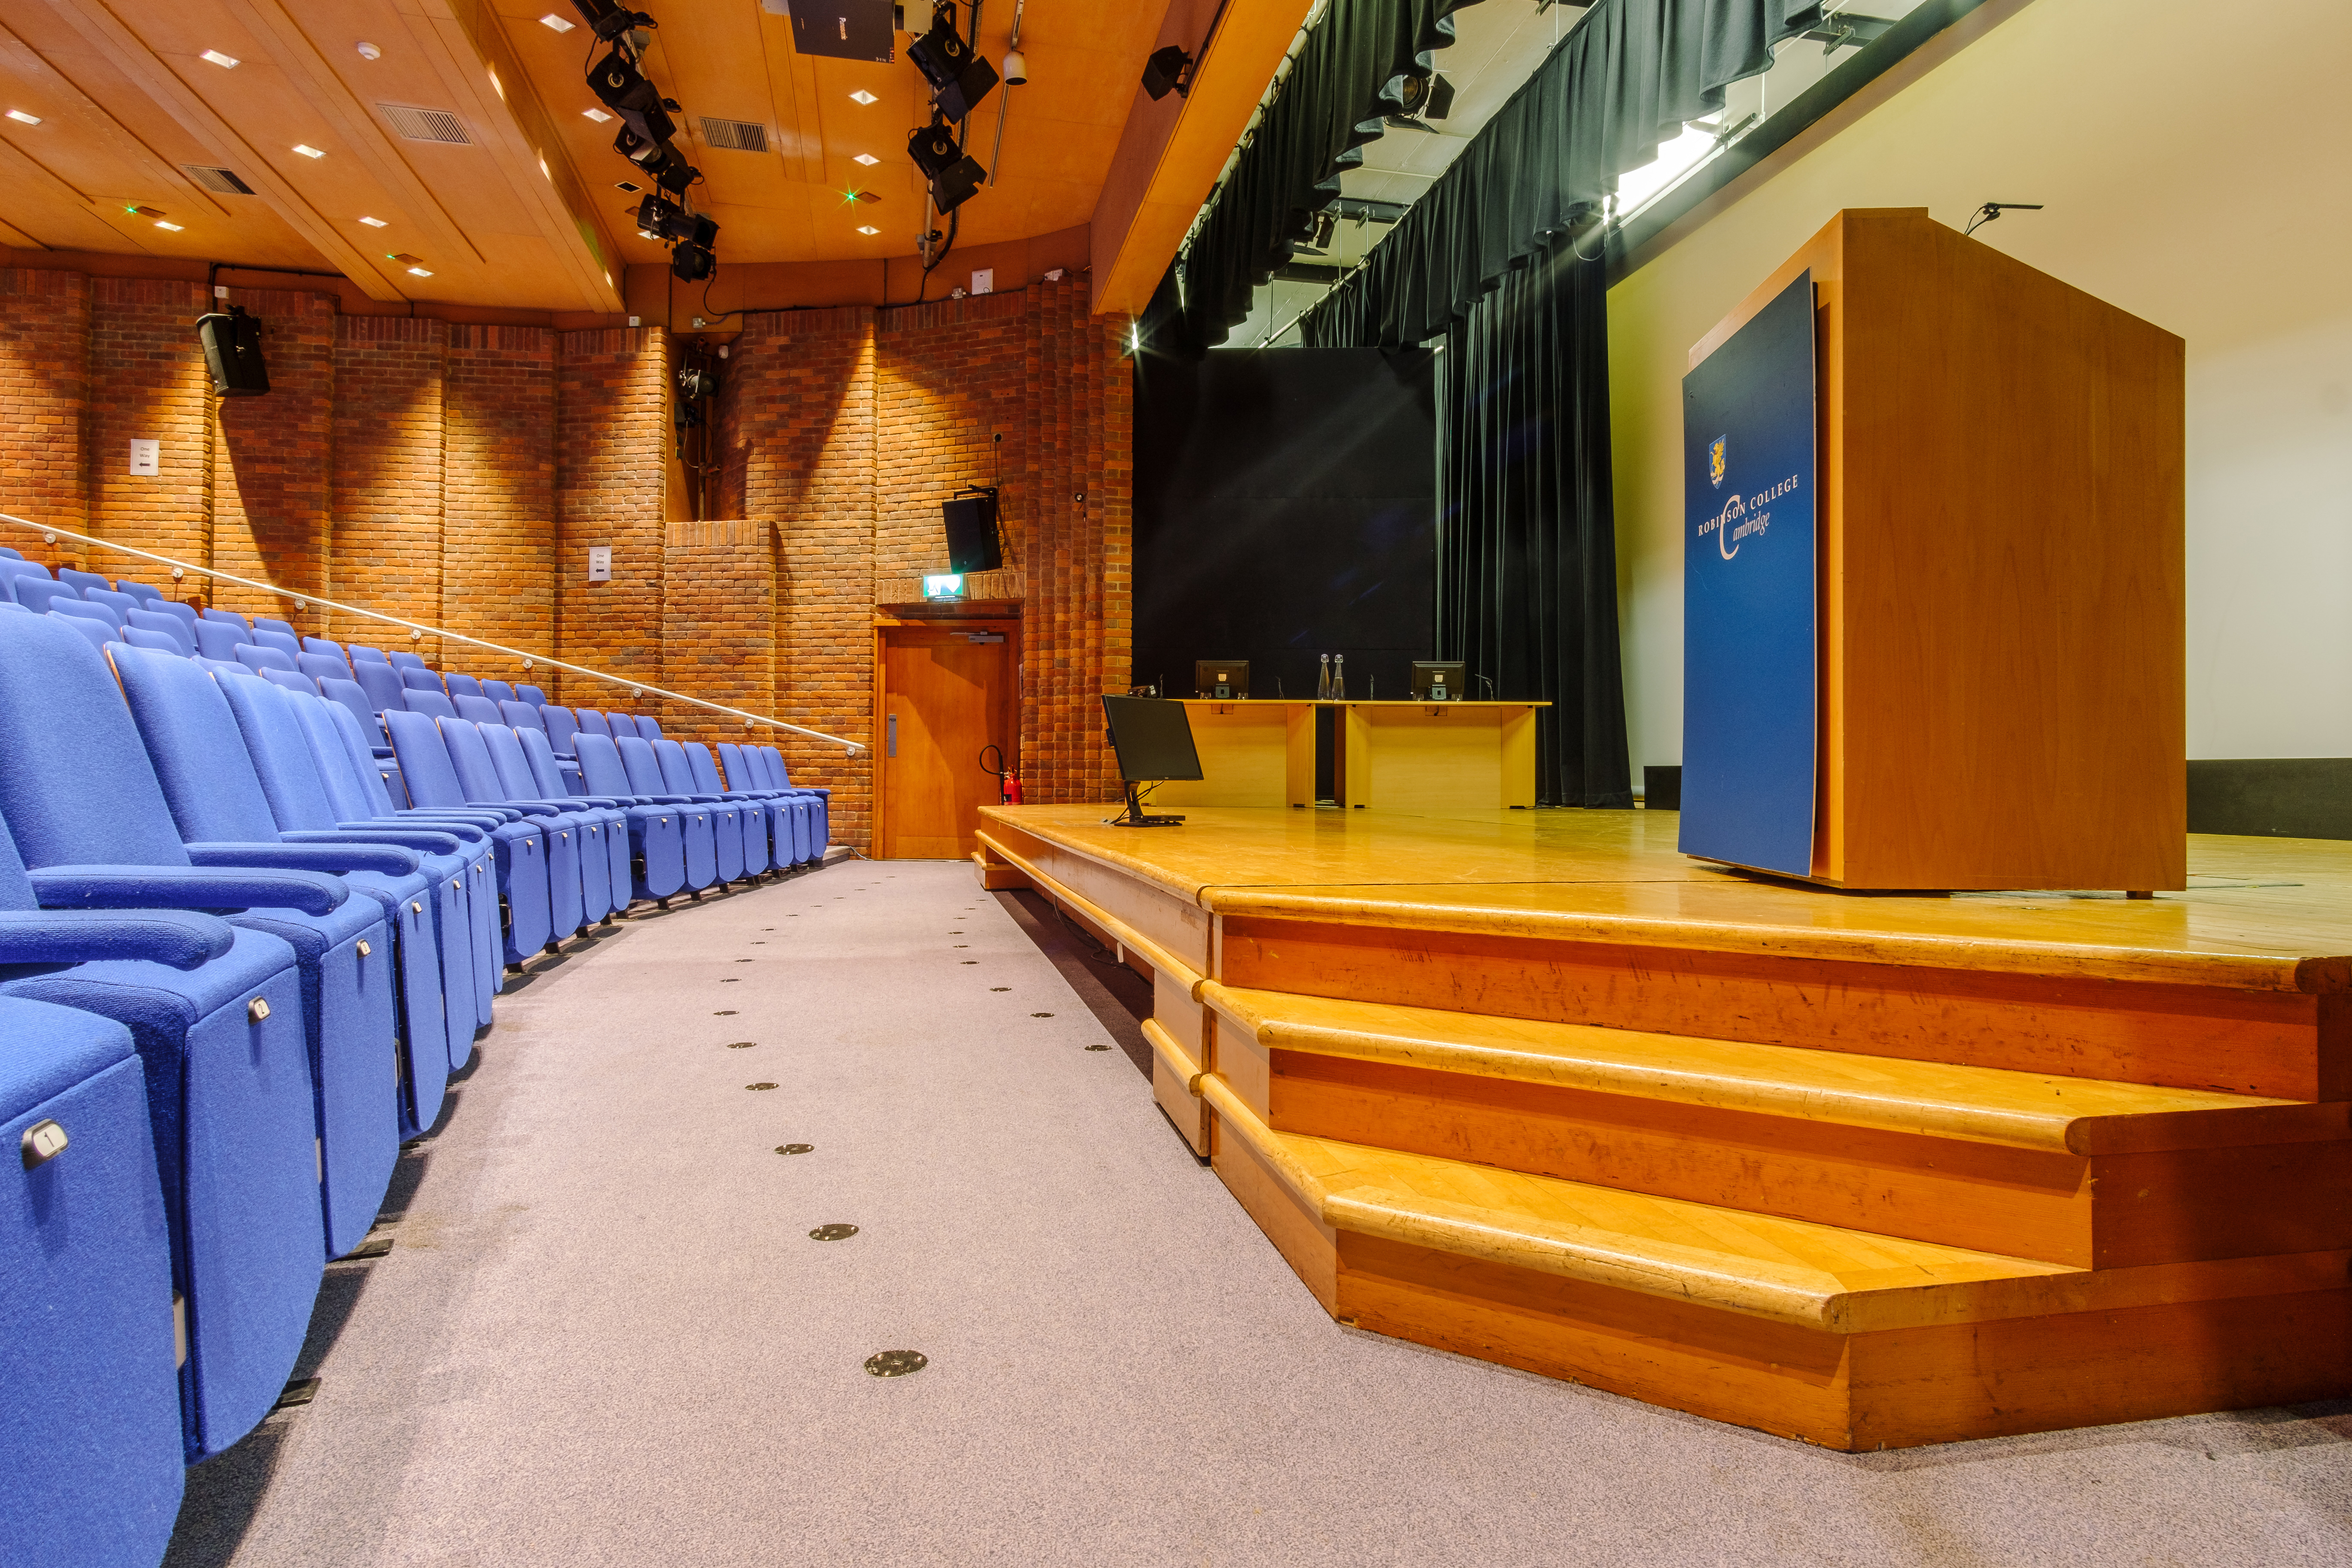 Image of Auditorium seating and stage